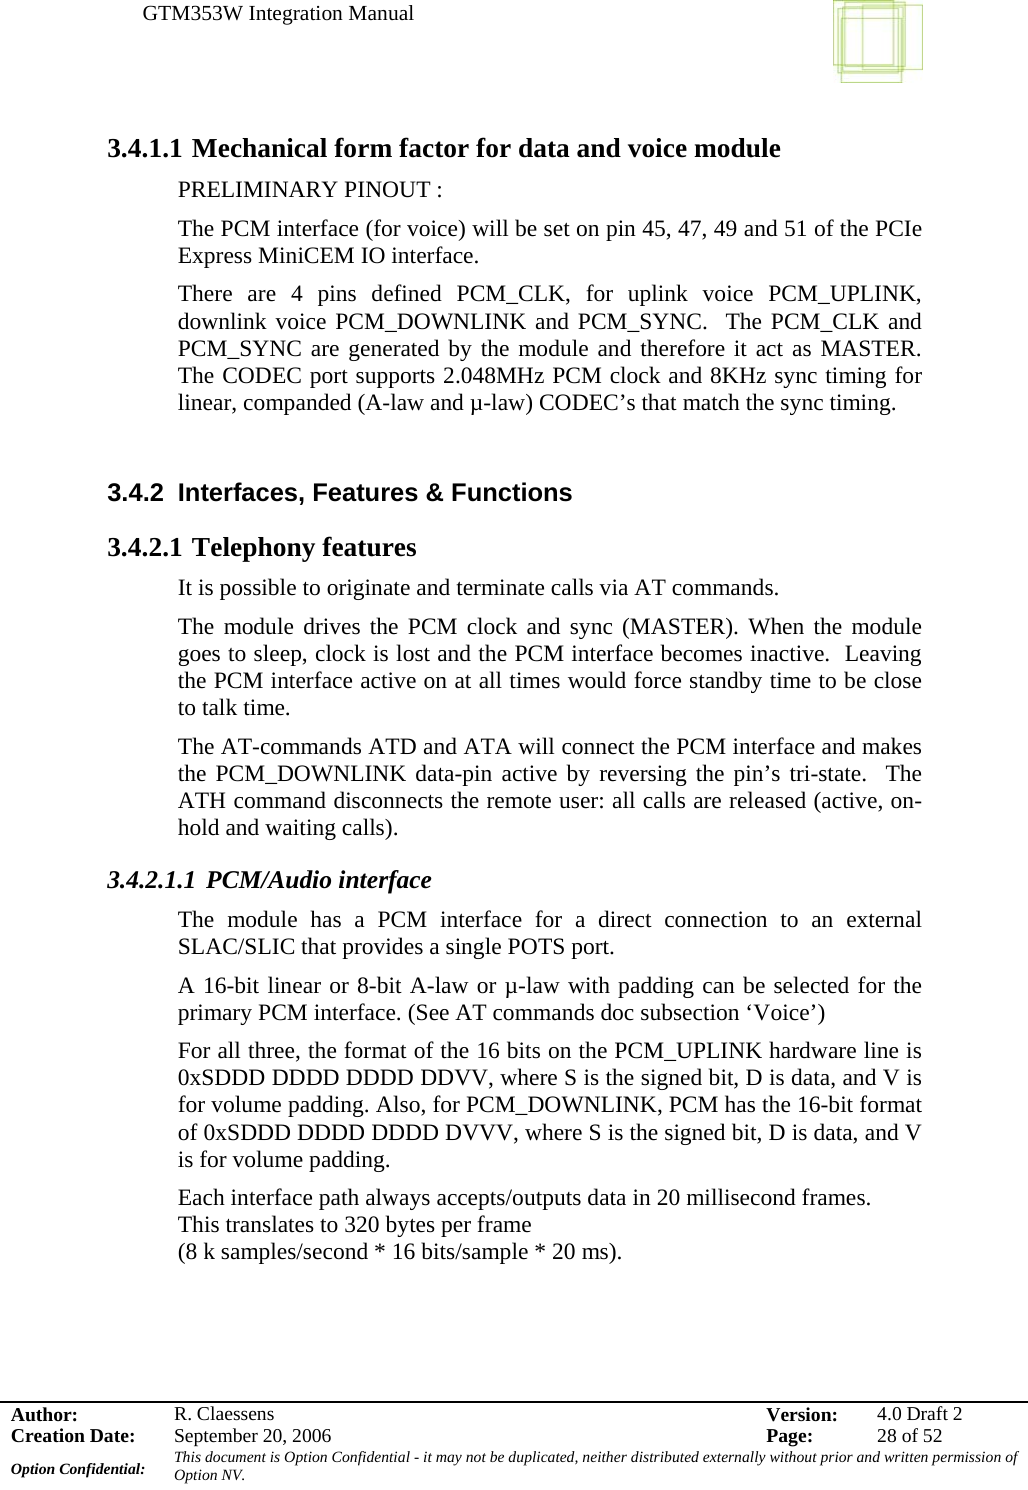 GTM353W Integration Manual      Author: R. Claessens  Version:  4.0 Draft 2Creation Date:  September 20, 2006  Page:  28 of 52 Option Confidential:  This document is Option Confidential - it may not be duplicated, neither distributed externally without prior and written permission of Option NV.    3.4.1.1 Mechanical form factor for data and voice module PRELIMINARY PINOUT : The PCM interface (for voice) will be set on pin 45, 47, 49 and 51 of the PCIe Express MiniCEM IO interface.   There are 4 pins defined PCM_CLK, for uplink voice PCM_UPLINK, downlink voice PCM_DOWNLINK and PCM_SYNC.  The PCM_CLK and PCM_SYNC are generated by the module and therefore it act as MASTER. The CODEC port supports 2.048MHz PCM clock and 8KHz sync timing for linear, companded (A-law and µ-law) CODEC’s that match the sync timing.  3.4.2  Interfaces, Features &amp; Functions 3.4.2.1 Telephony features It is possible to originate and terminate calls via AT commands.   The module drives the PCM clock and sync (MASTER). When the module goes to sleep, clock is lost and the PCM interface becomes inactive.  Leaving the PCM interface active on at all times would force standby time to be close to talk time. The AT-commands ATD and ATA will connect the PCM interface and makes the PCM_DOWNLINK data-pin active by reversing the pin’s tri-state.  The ATH command disconnects the remote user: all calls are released (active, on-hold and waiting calls). 3.4.2.1.1 PCM/Audio interface The module has a PCM interface for a direct connection to an external SLAC/SLIC that provides a single POTS port.   A 16-bit linear or 8-bit A-law or µ-law with padding can be selected for the primary PCM interface. (See AT commands doc subsection ‘Voice’) For all three, the format of the 16 bits on the PCM_UPLINK hardware line is 0xSDDD DDDD DDDD DDVV, where S is the signed bit, D is data, and V is for volume padding. Also, for PCM_DOWNLINK, PCM has the 16-bit format of 0xSDDD DDDD DDDD DVVV, where S is the signed bit, D is data, and V is for volume padding. Each interface path always accepts/outputs data in 20 millisecond frames. This translates to 320 bytes per frame (8 k samples/second * 16 bits/sample * 20 ms).  